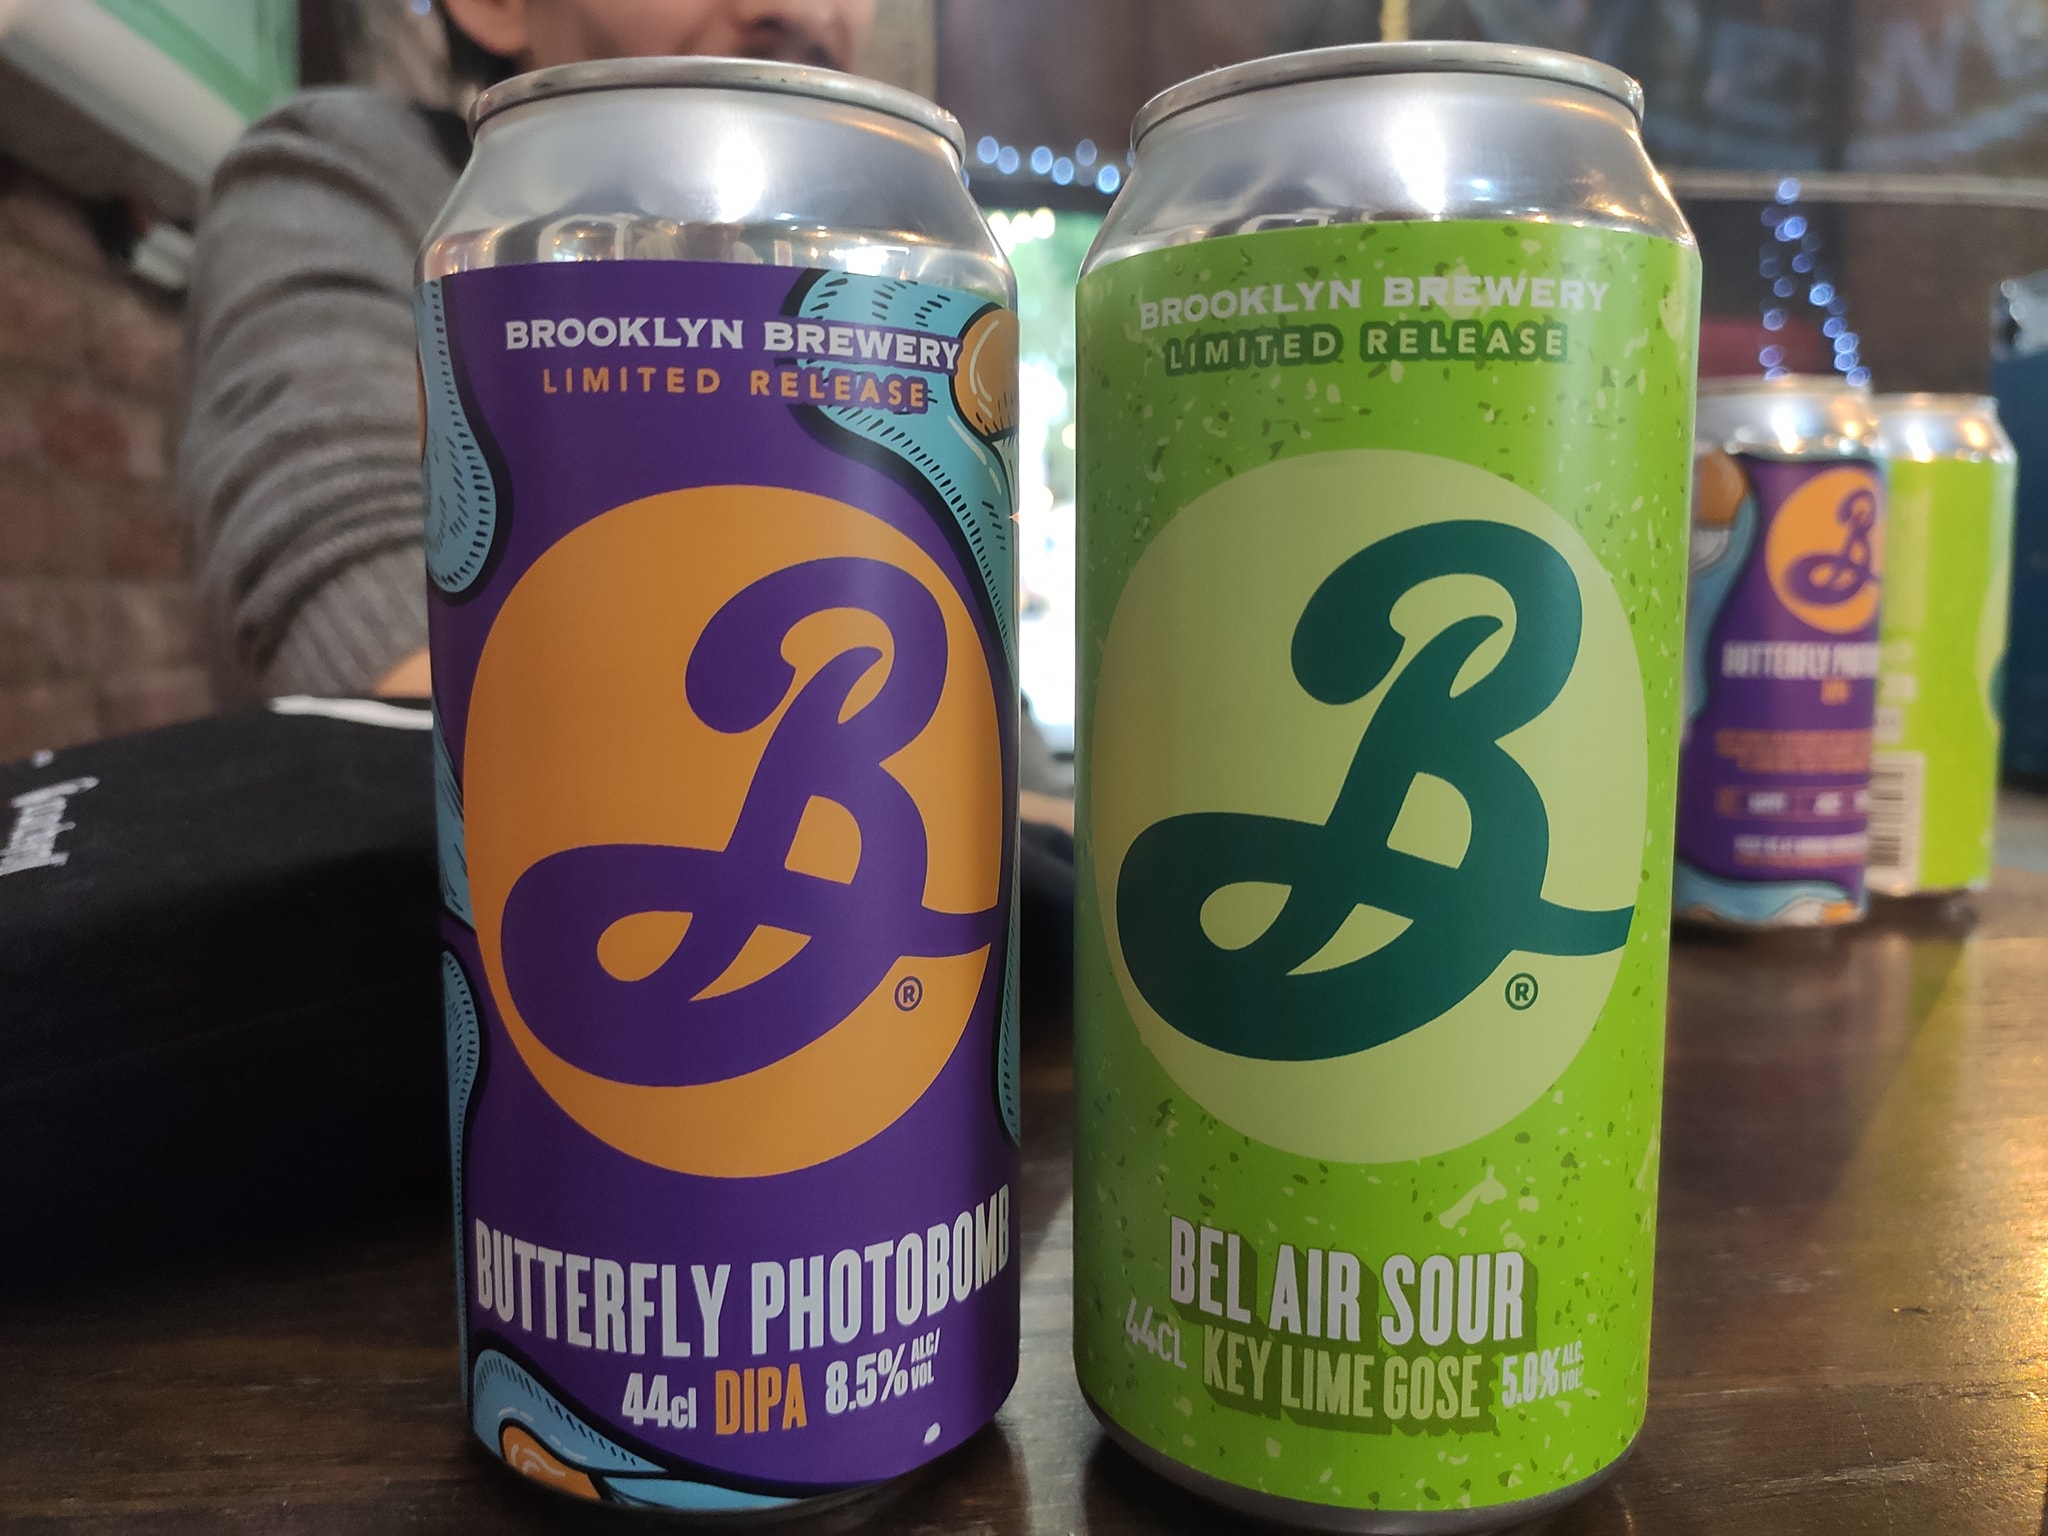 Butterfly Photobomb et Bel Air Sour - Brooklyn Brewery